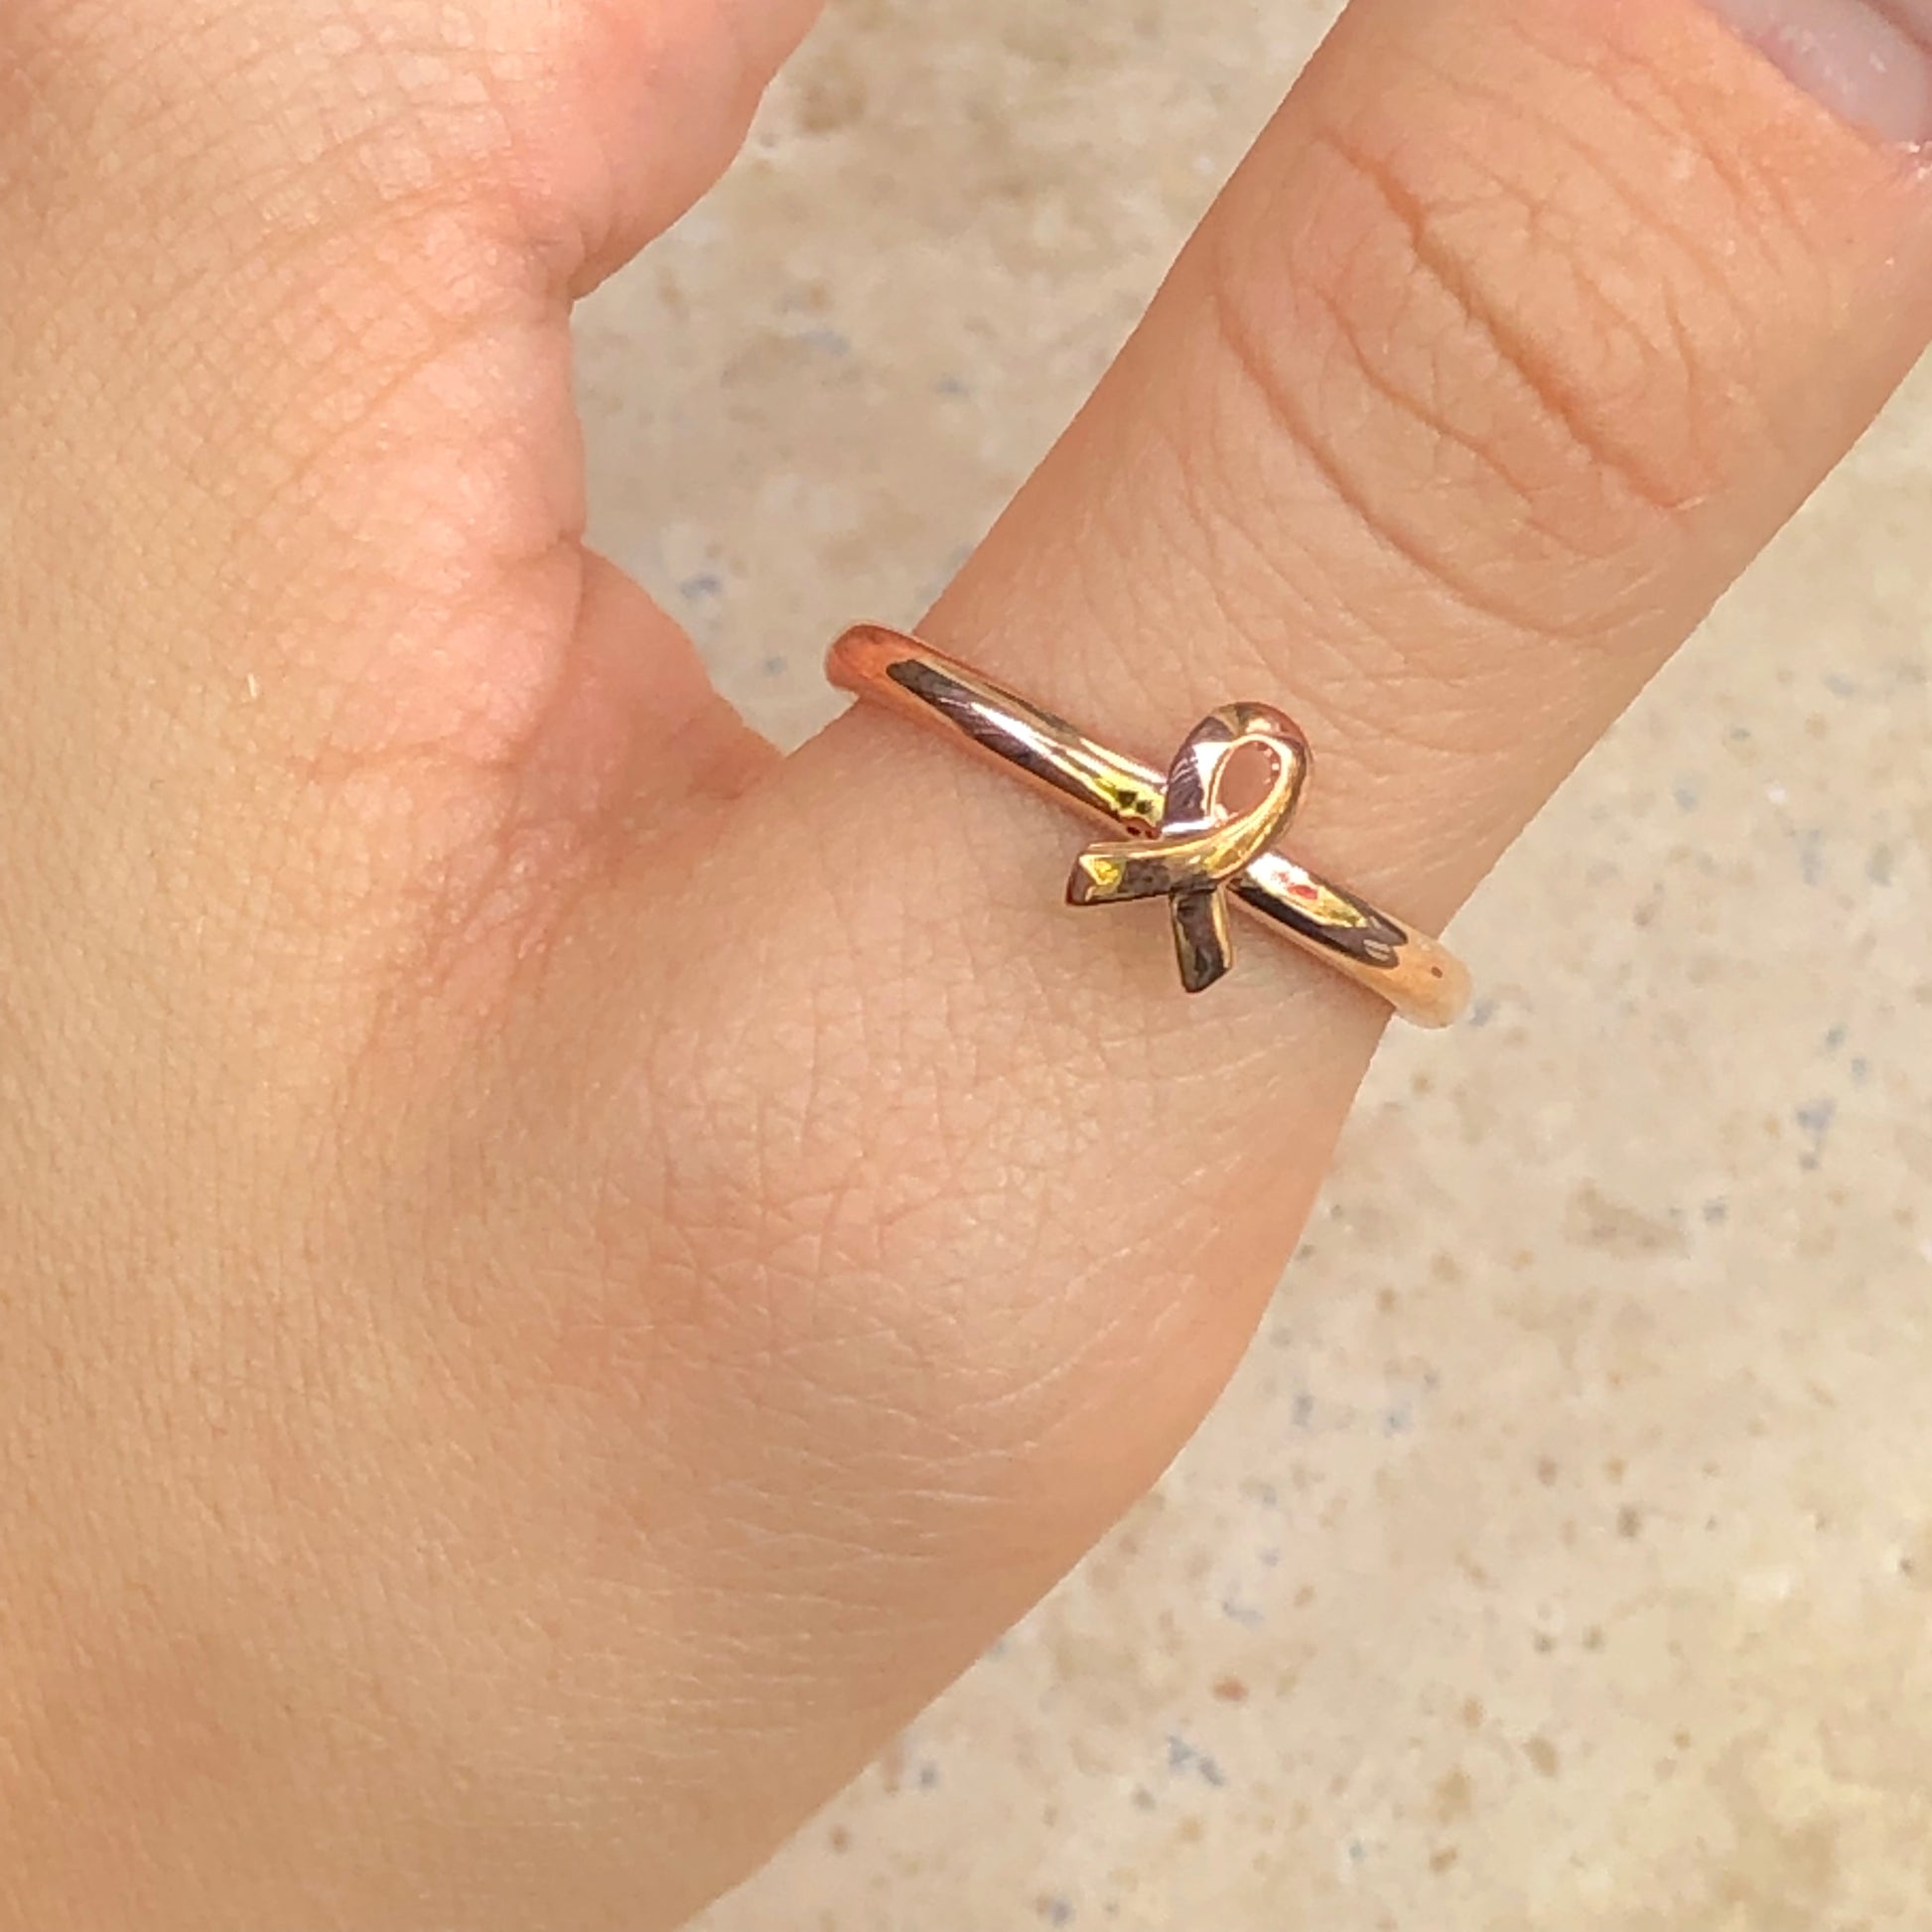 Rose Gold Plated Sterling Silver Breast Cancer Awareness Ribbon Ring, Rose Gold Plated Sterling Silver Breast Cancer Awareness Ribbon Ring - Legacy Saint Jewelry